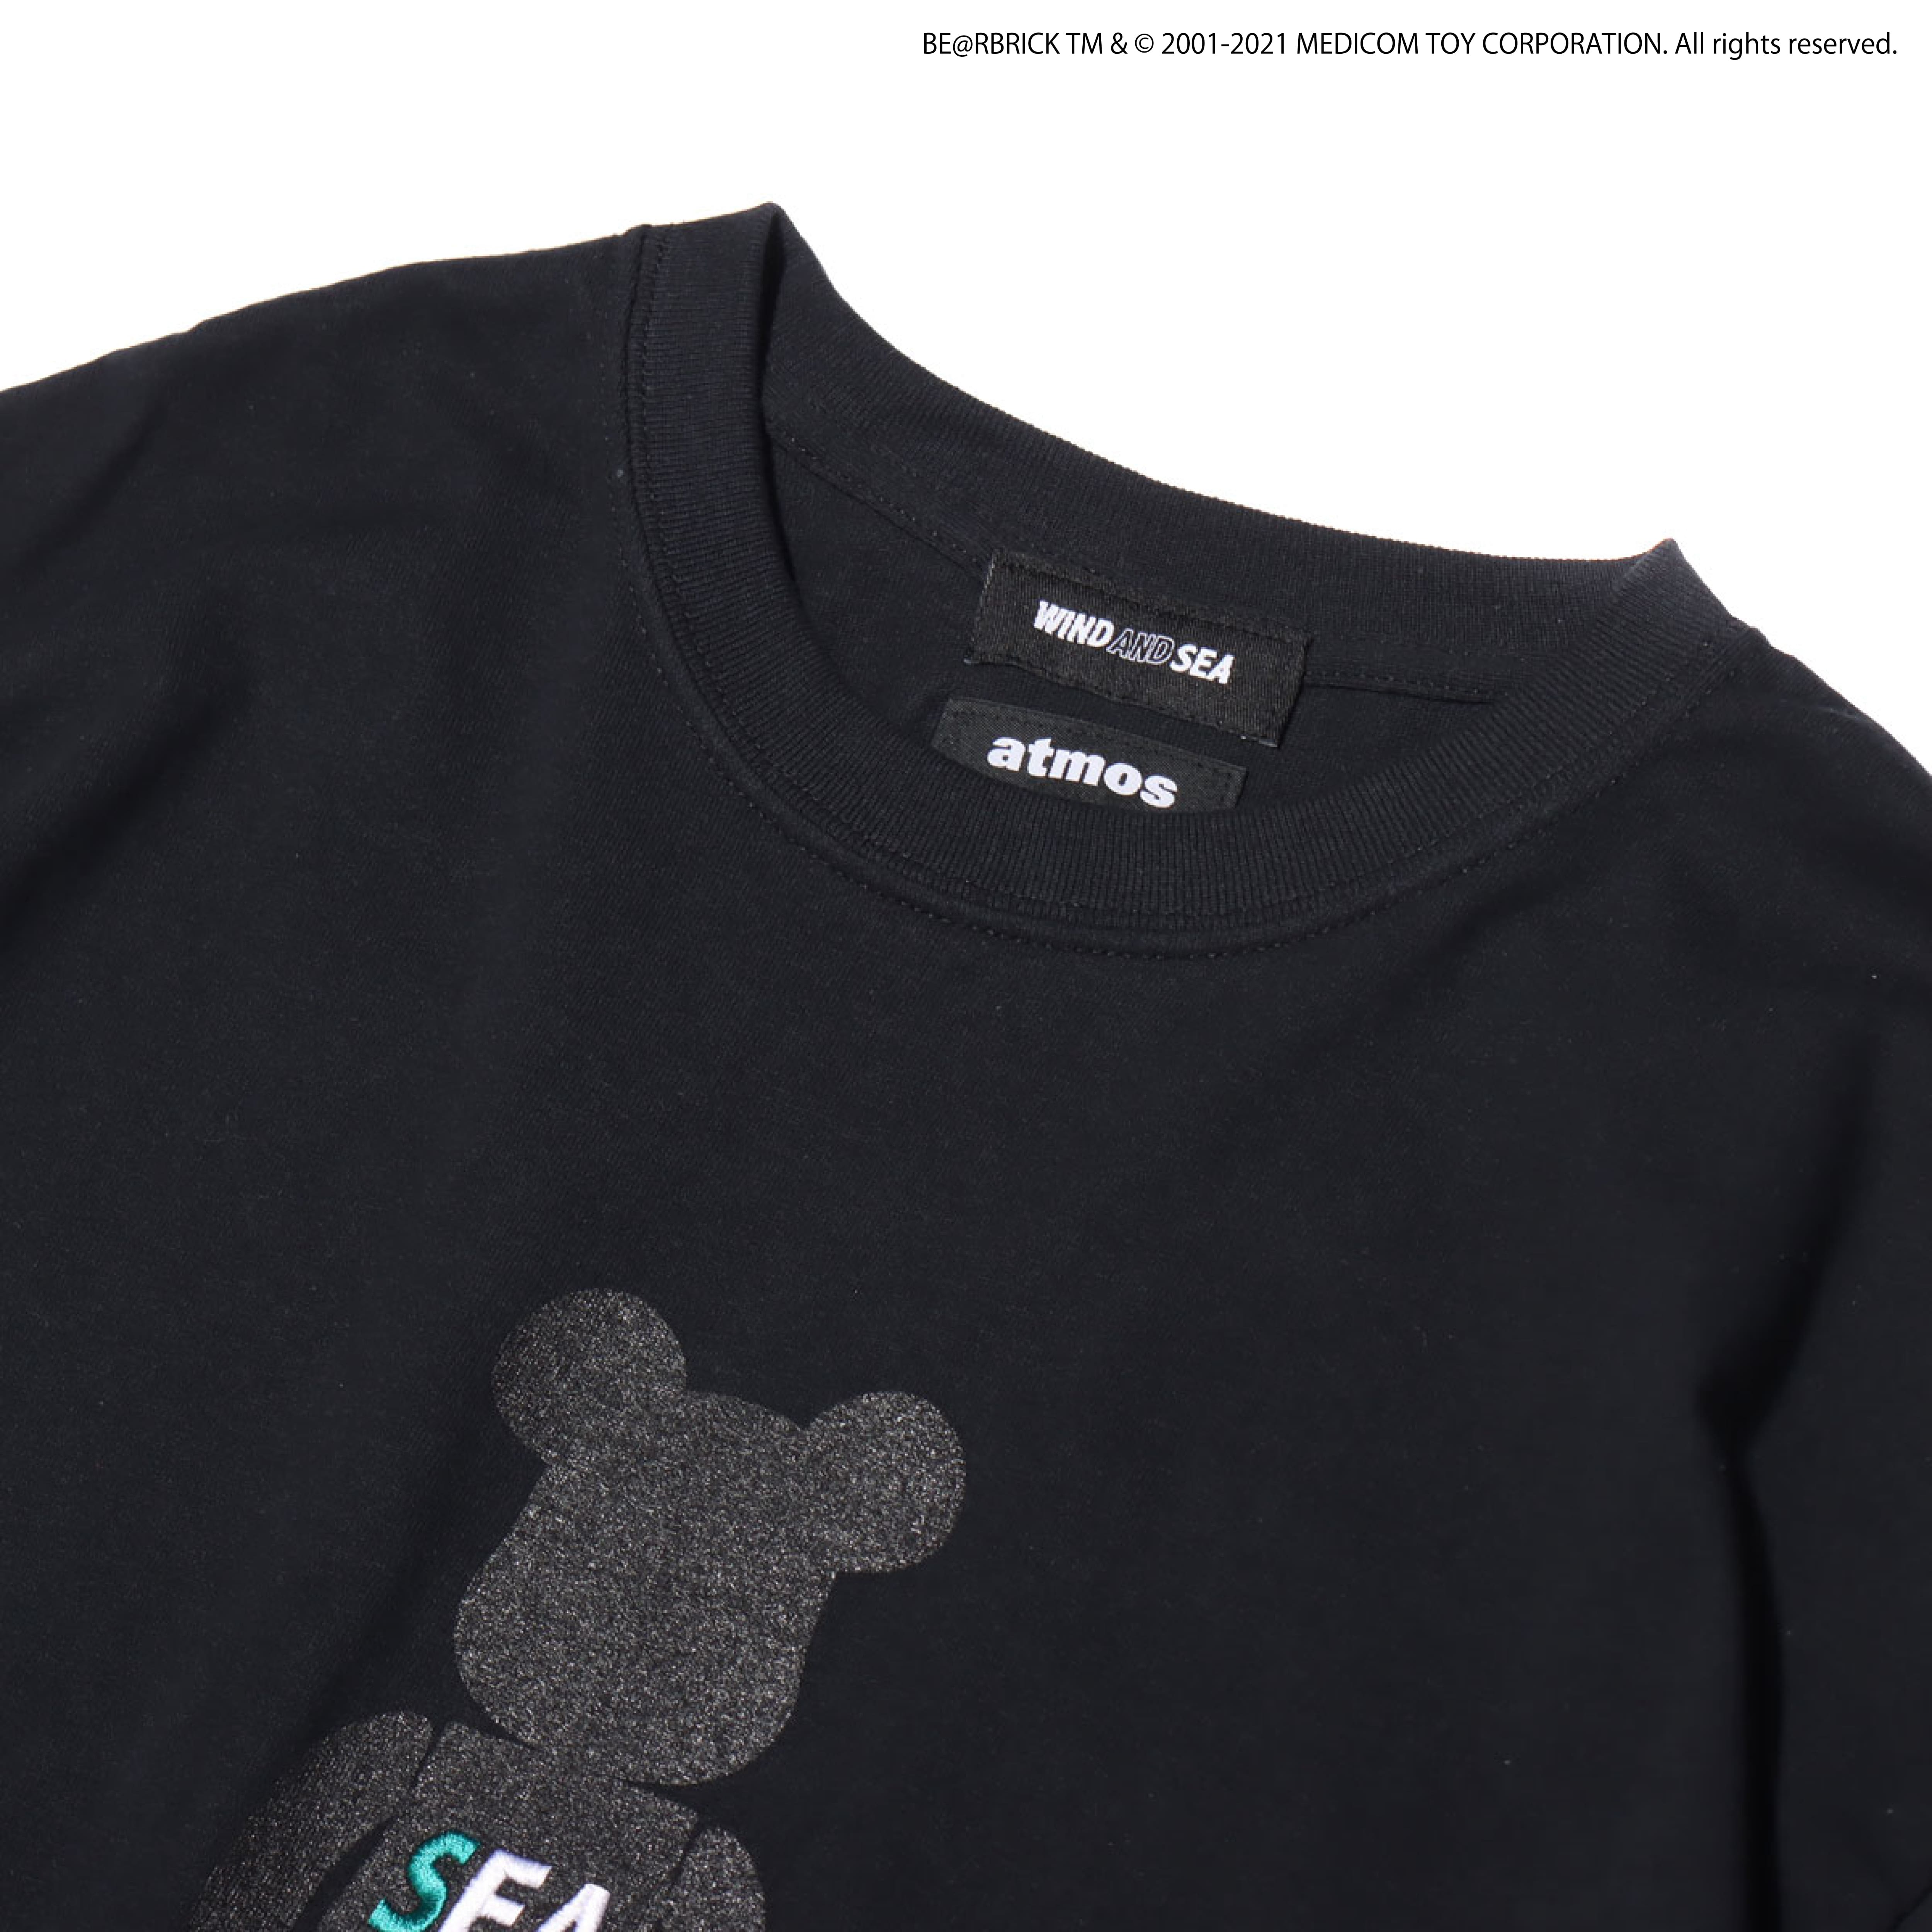 BE@RBRICK x atmos x WIND AND SEA Tシャツ LBERBRICK